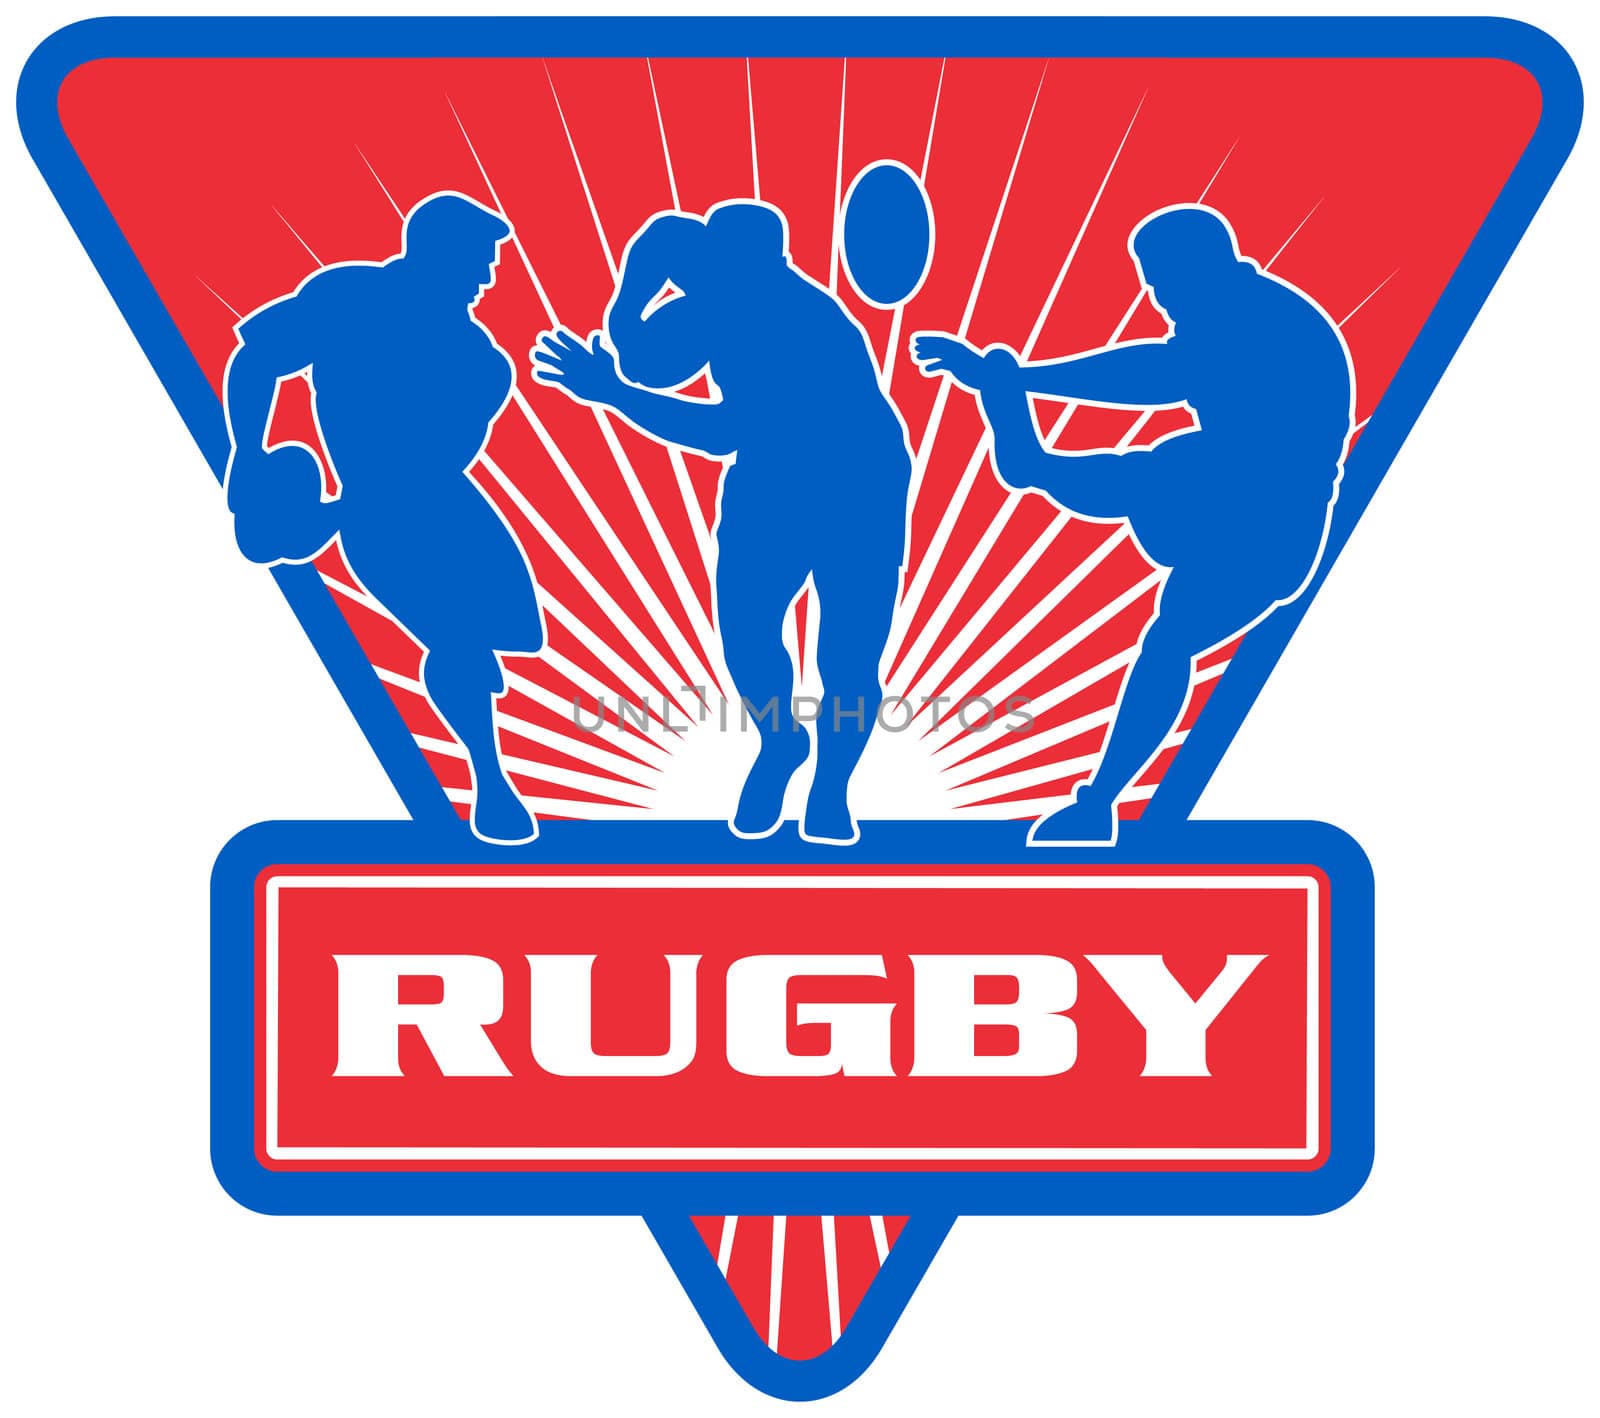 illustration of silhouette of rugby player running passing fending and kicking the ball set inside a shield with words "rugby"